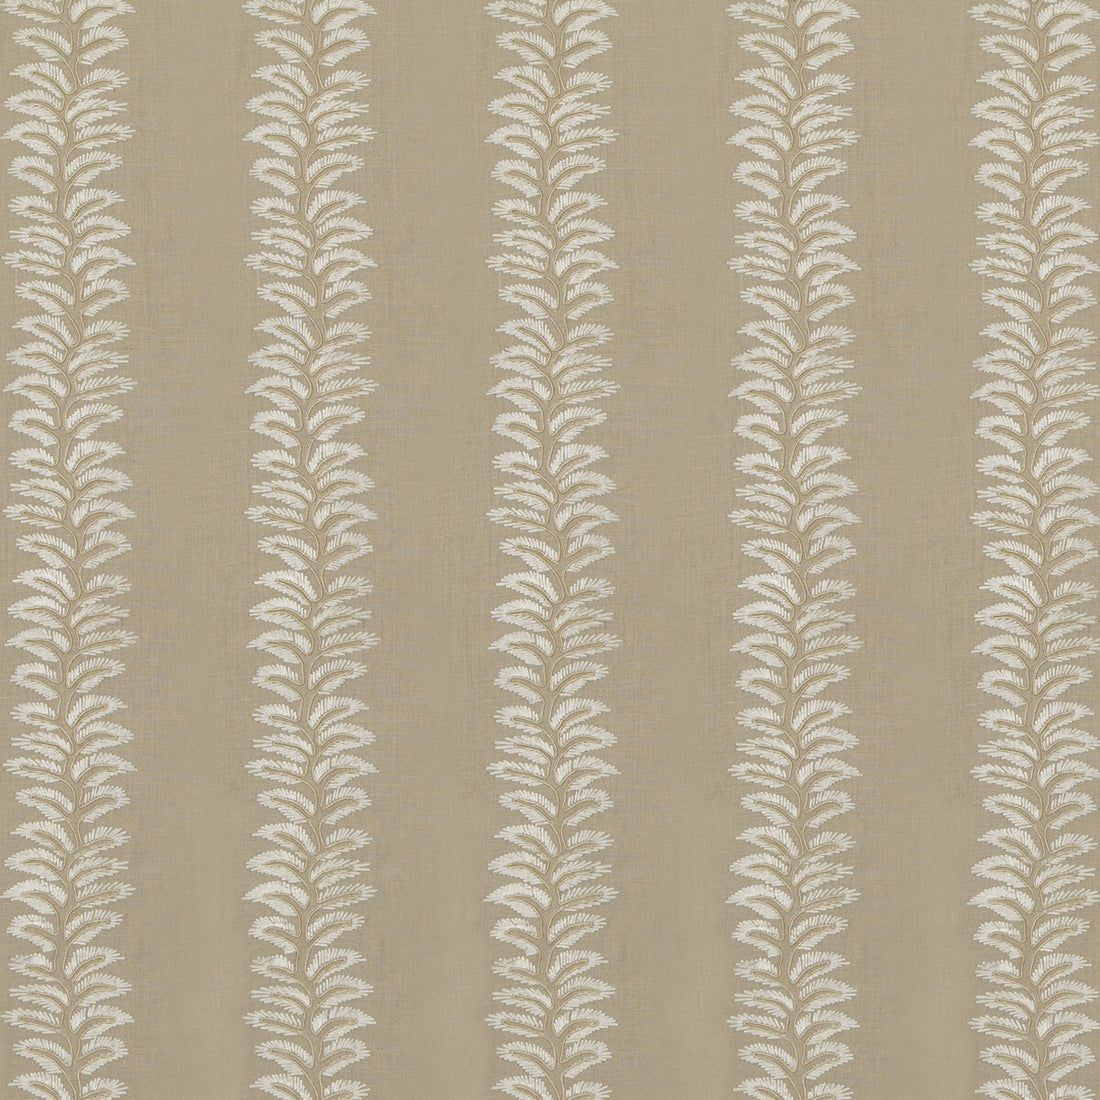 New Bradbourne fabric in linen color - pattern BF10946.110.0 - by G P &amp; J Baker in the Ashmore collection